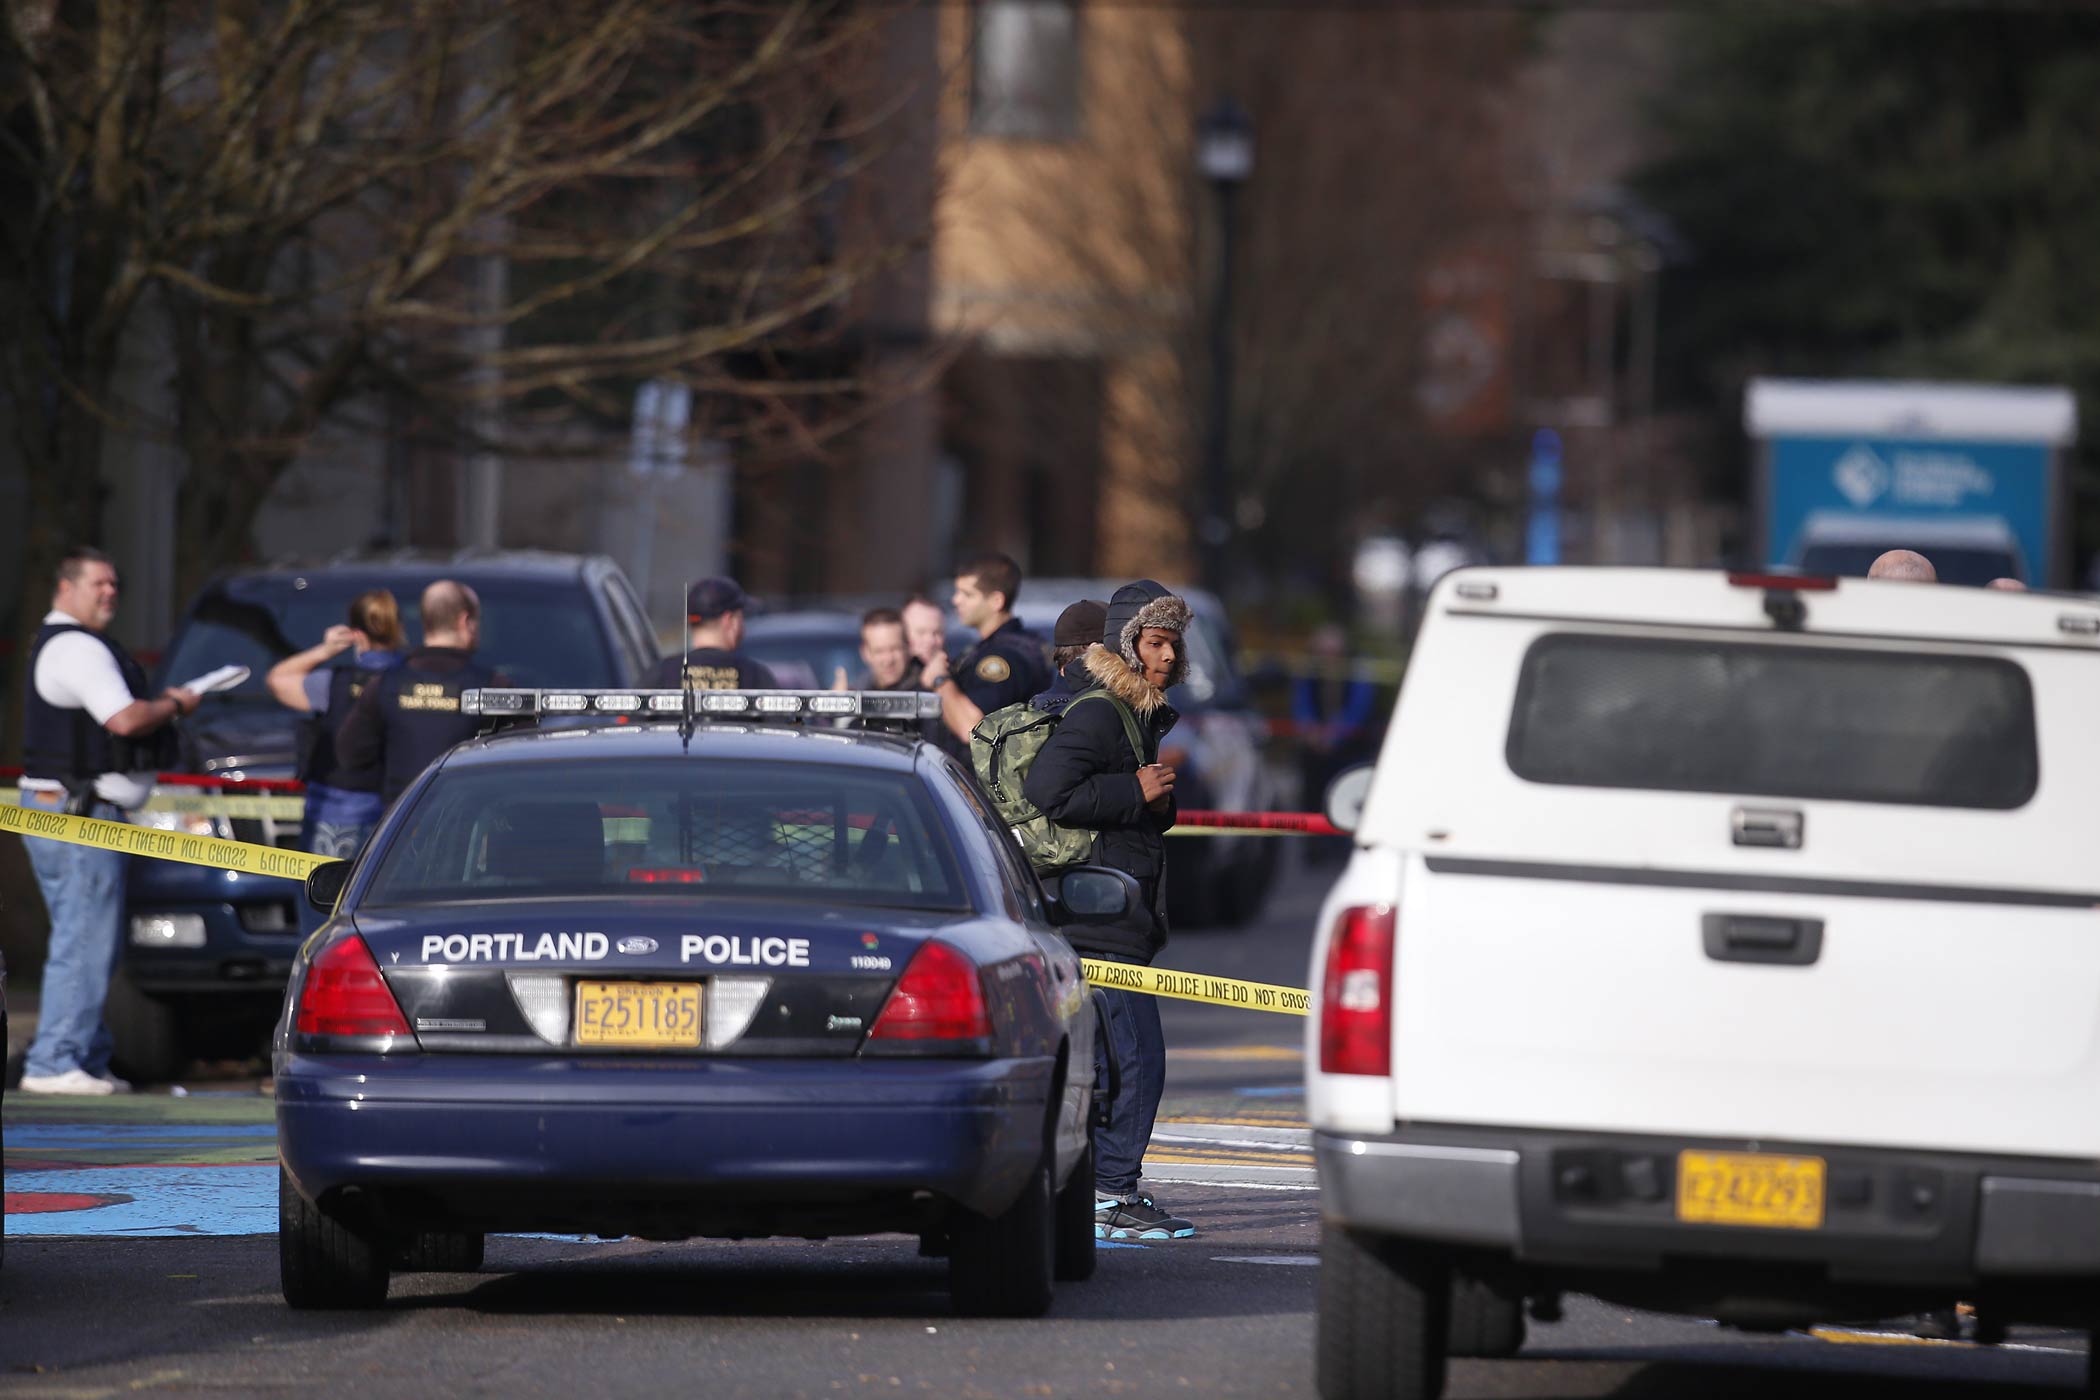 The scene in North Portland where a shooting occurred near Rosemary Anderson High School on Dec. 12, 2014. (Bruce Ely—The Register-Guard/AP)